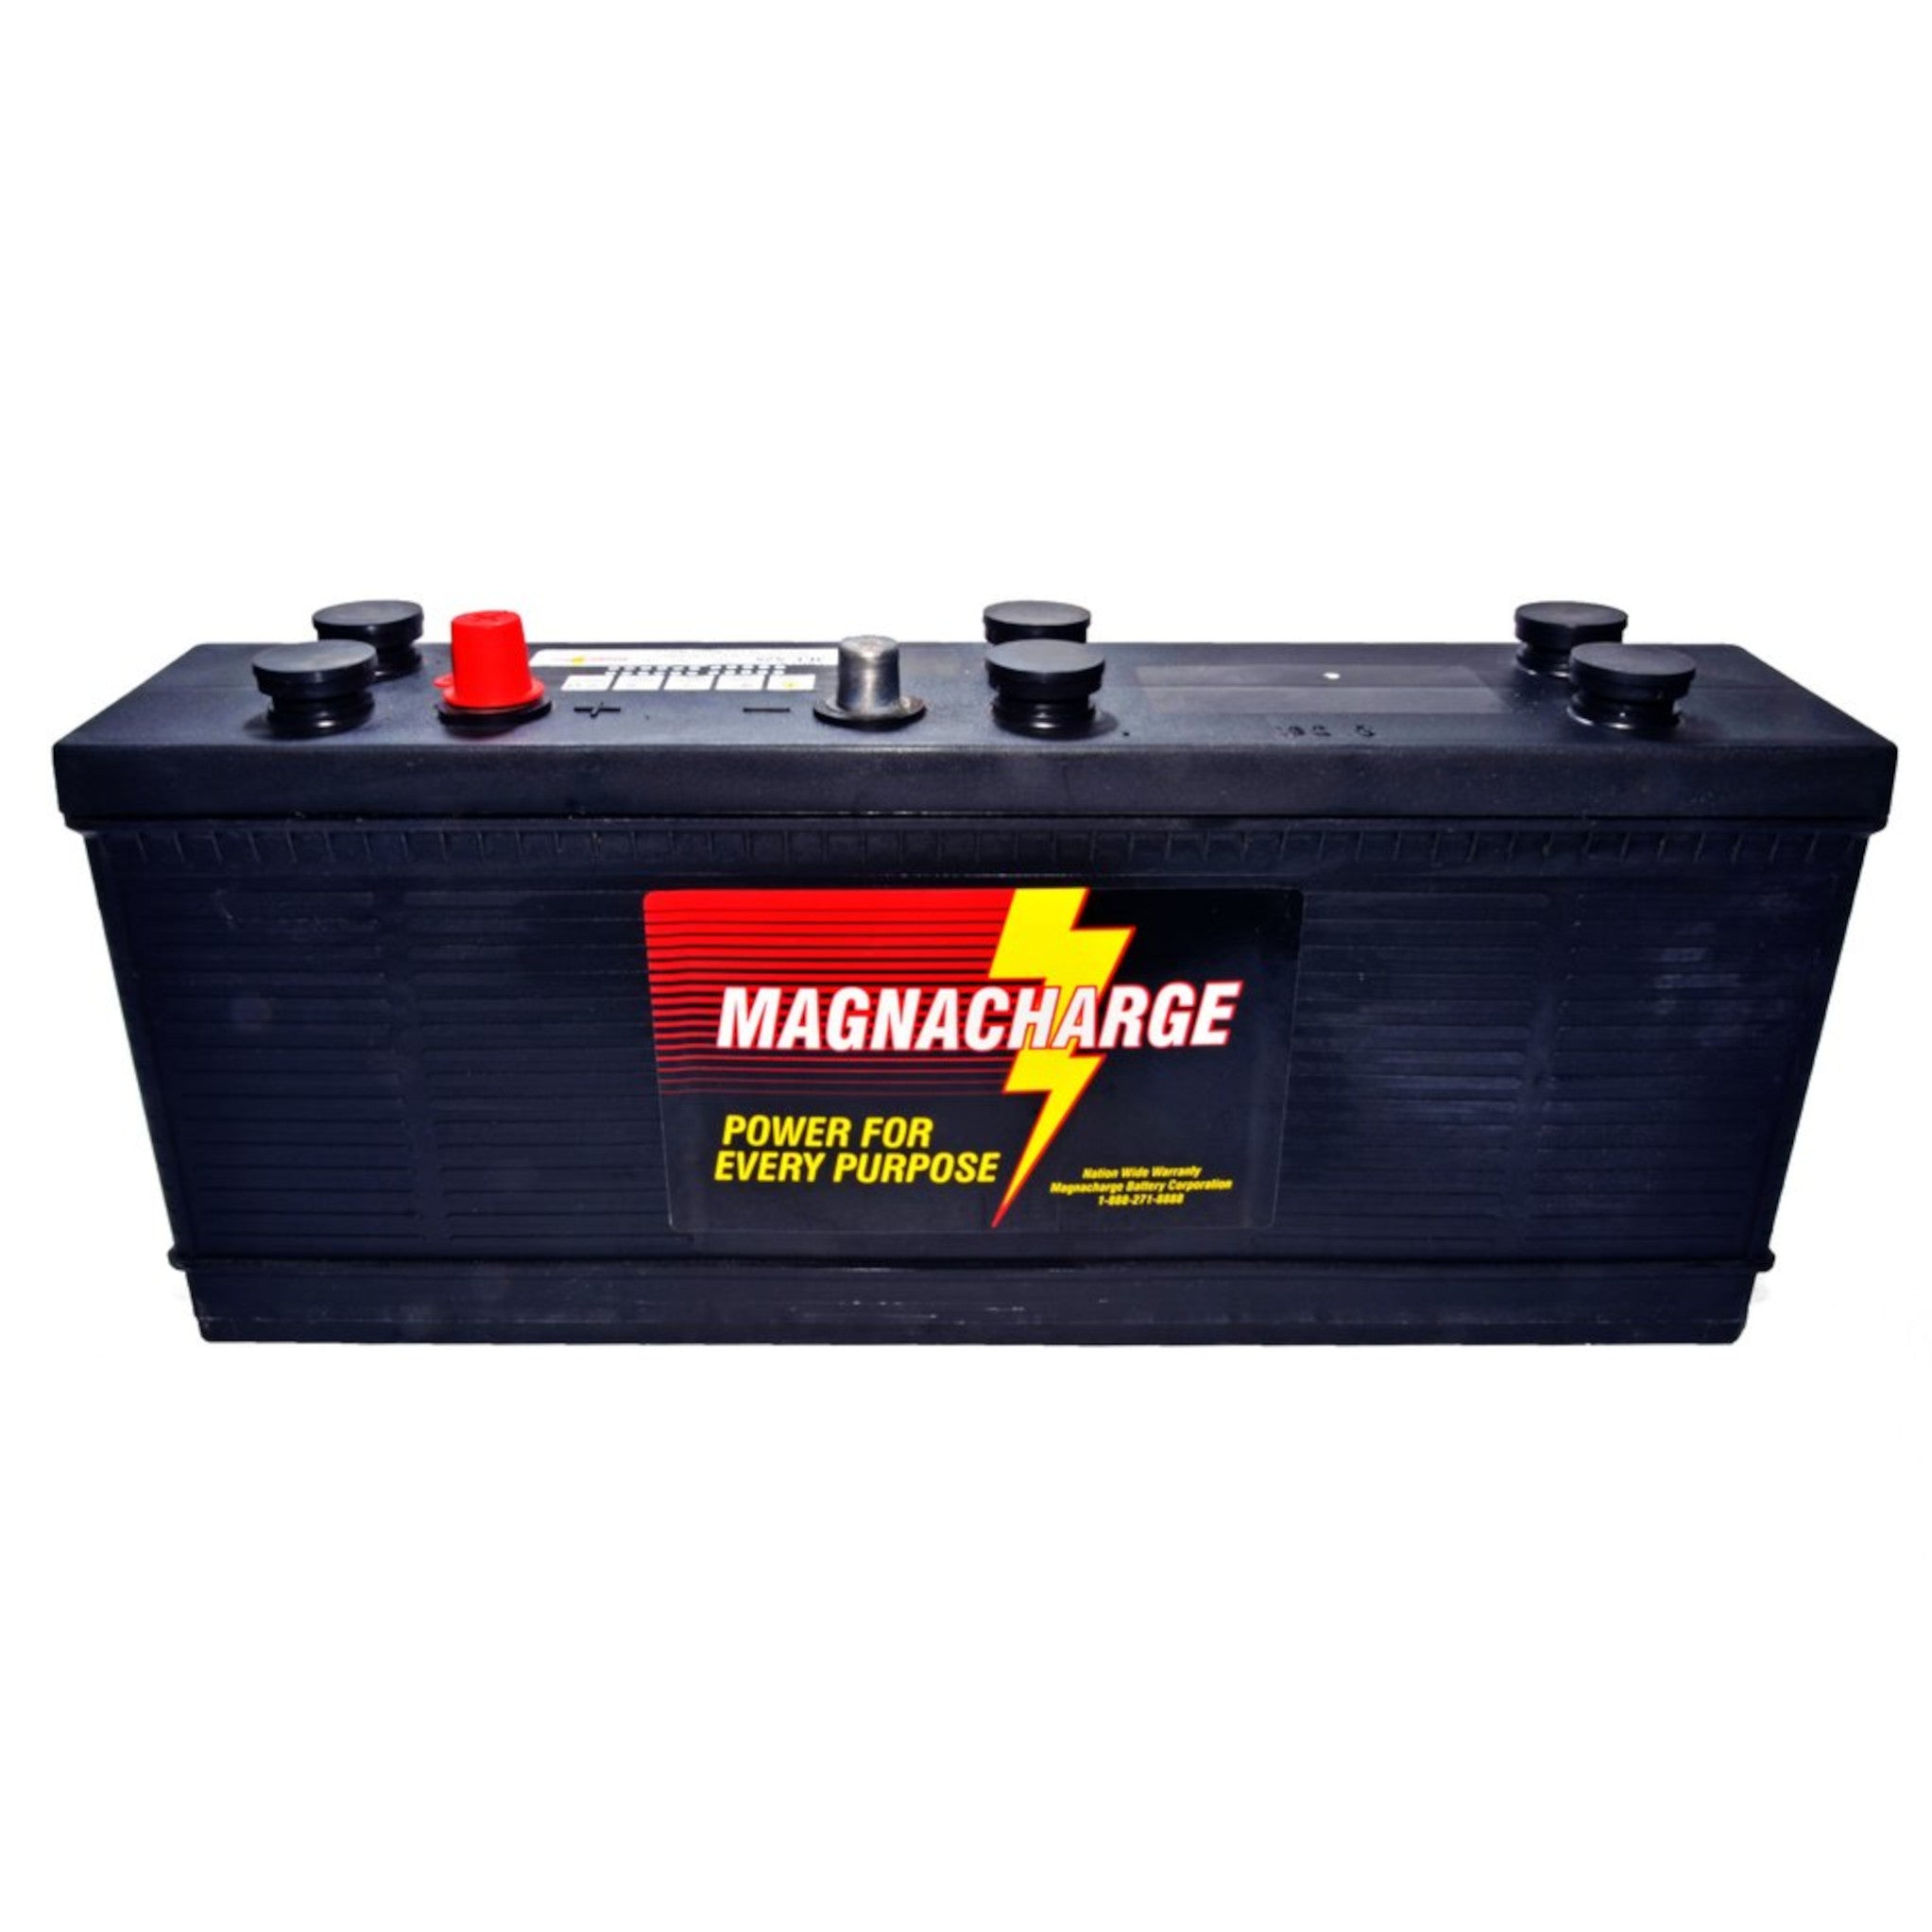 Magnacharge 3EE-525 Group 3EE Commercial Battery